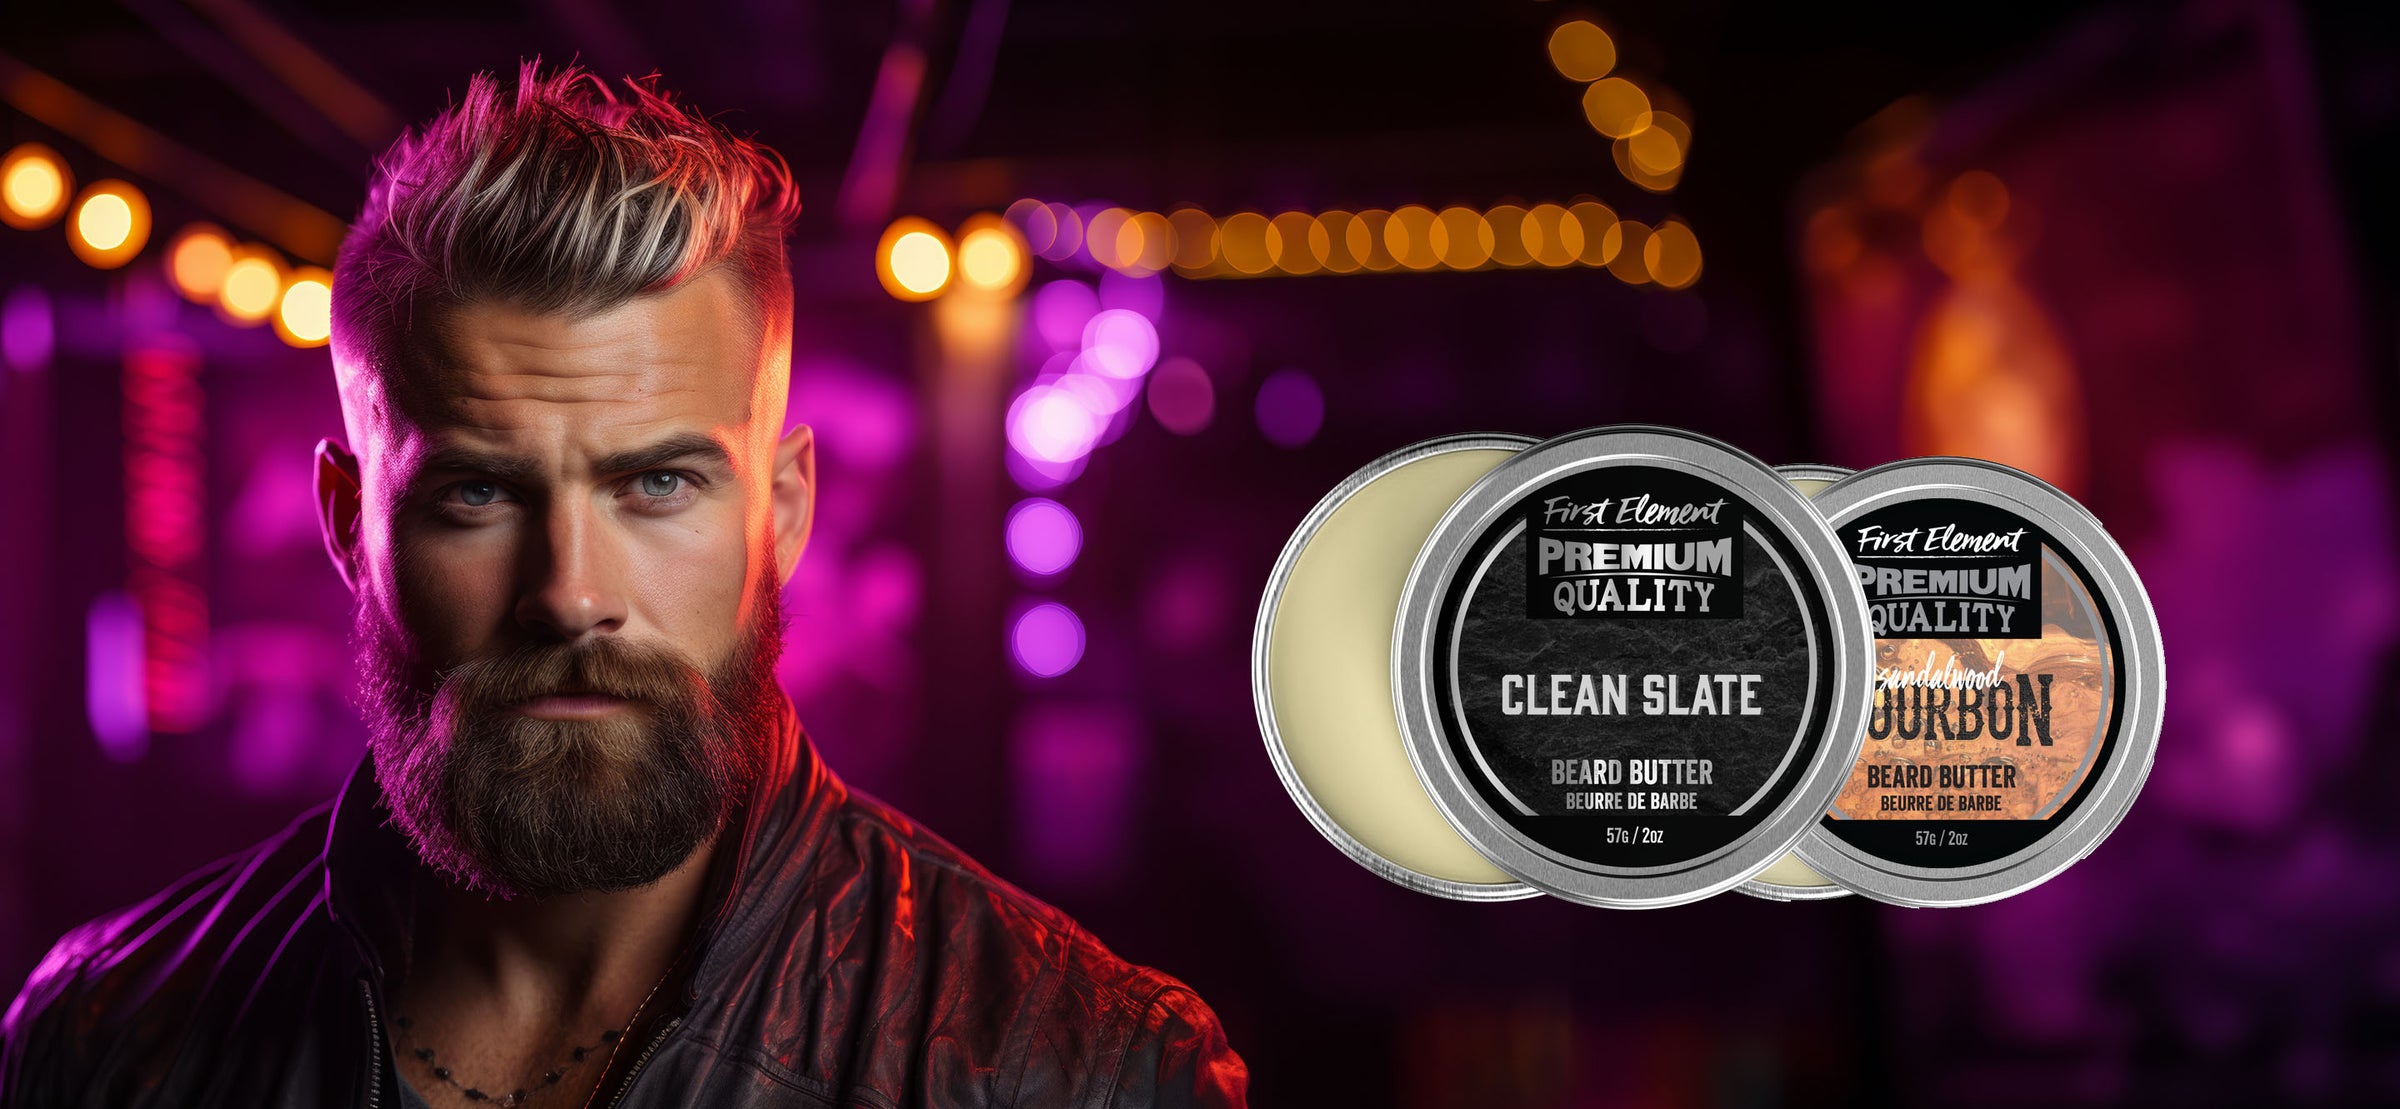 Bearded man with a Neon lighted background and Premium beard butter displayed beside him